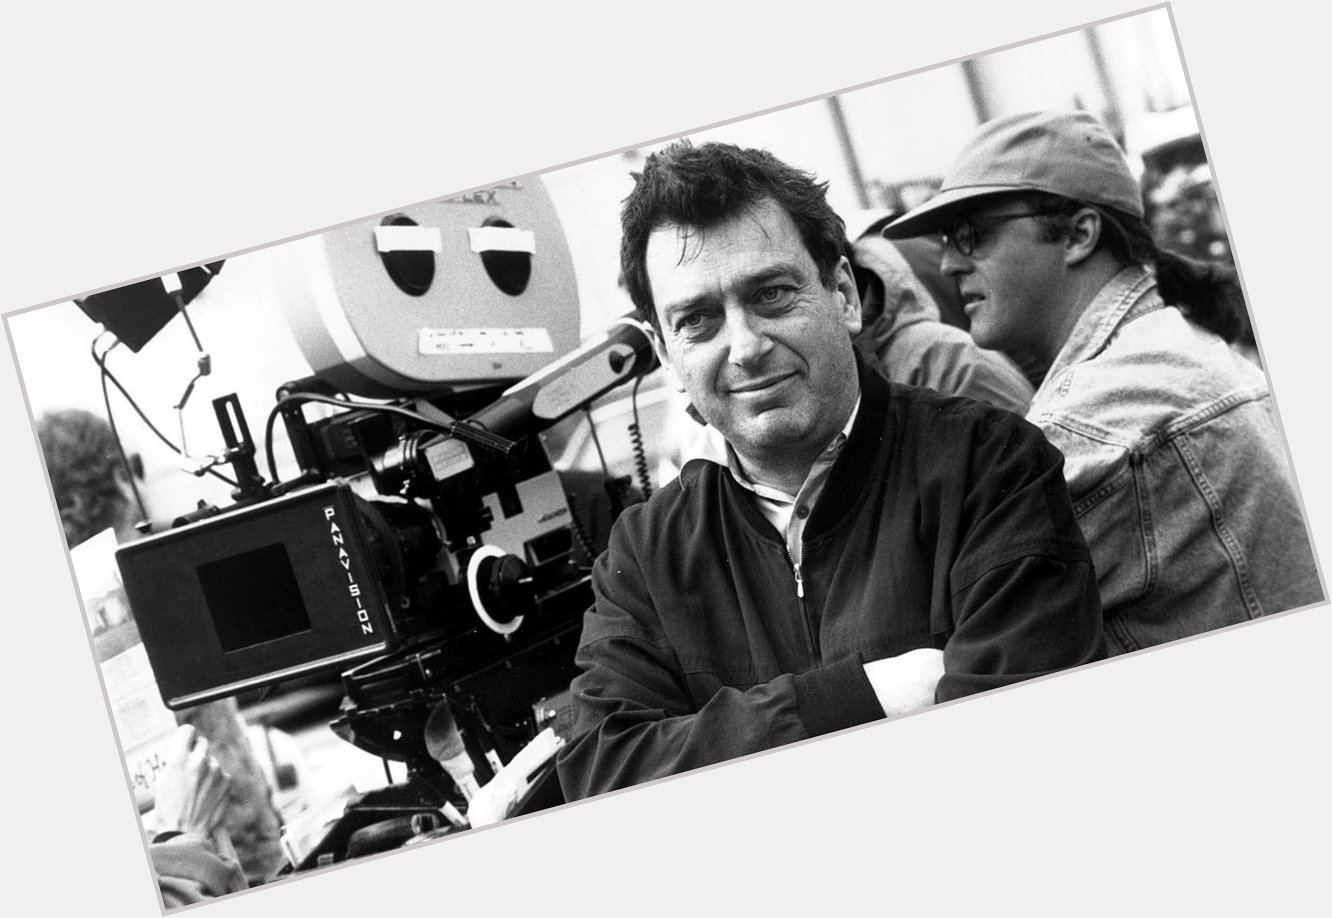 Happy Birthday Stephen Frears!! He has made so many great films, but The Hit May be my all time favorite by him! 